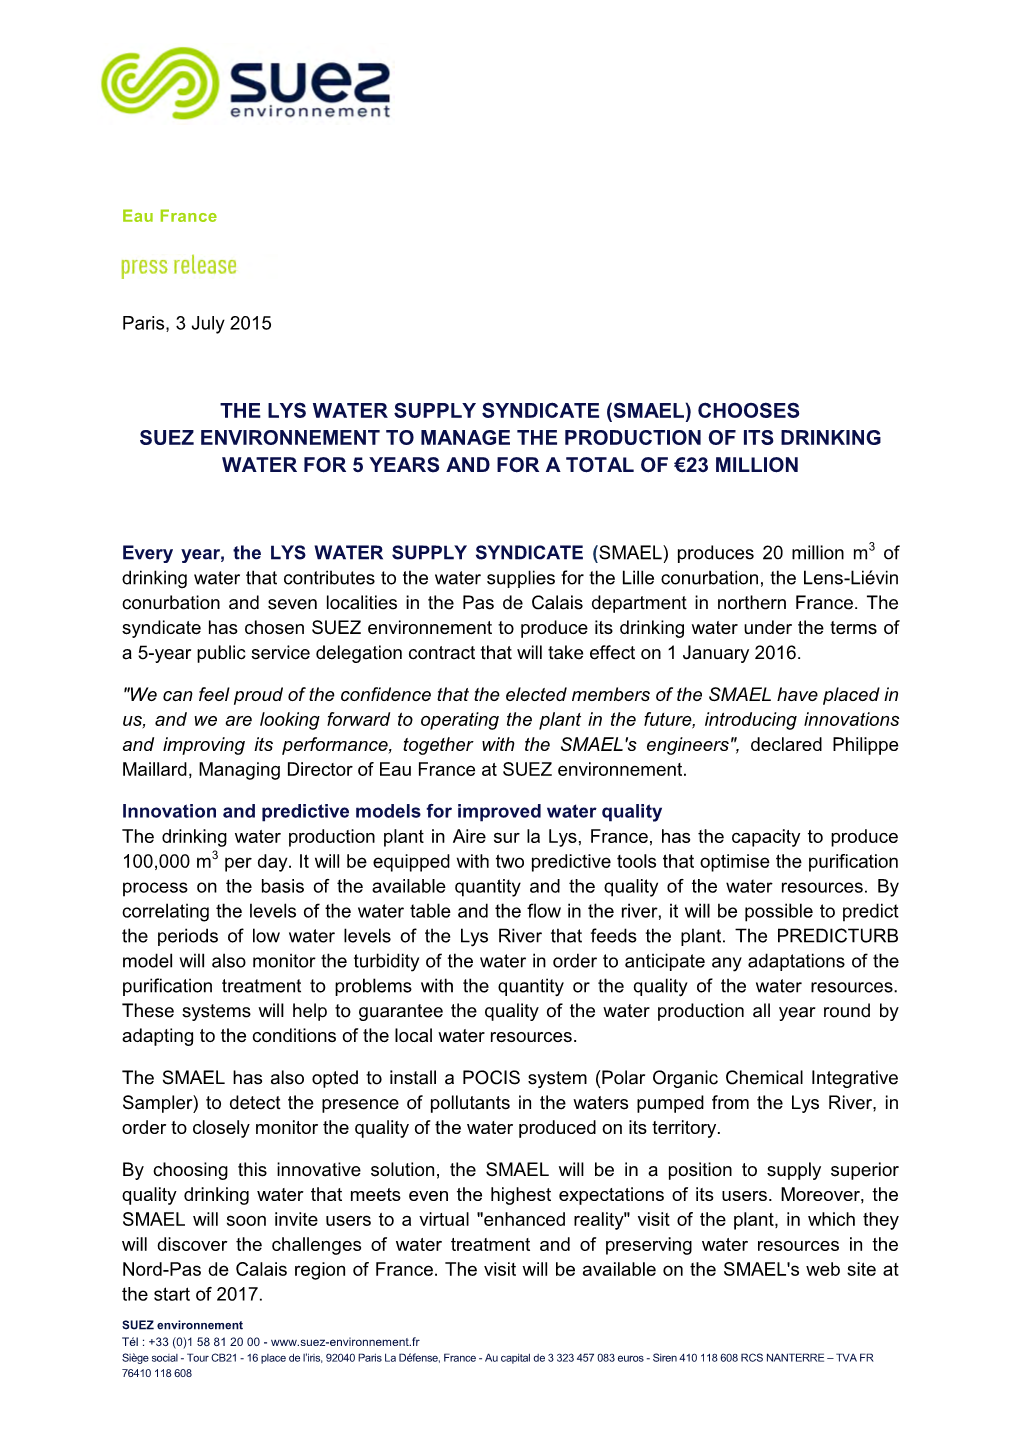 The Lys Water Supply Syndicate (Smael) Chooses Suez Environnement to Manage the Production of Its Drinking Water for 5 Years and for a Total of €23 Million